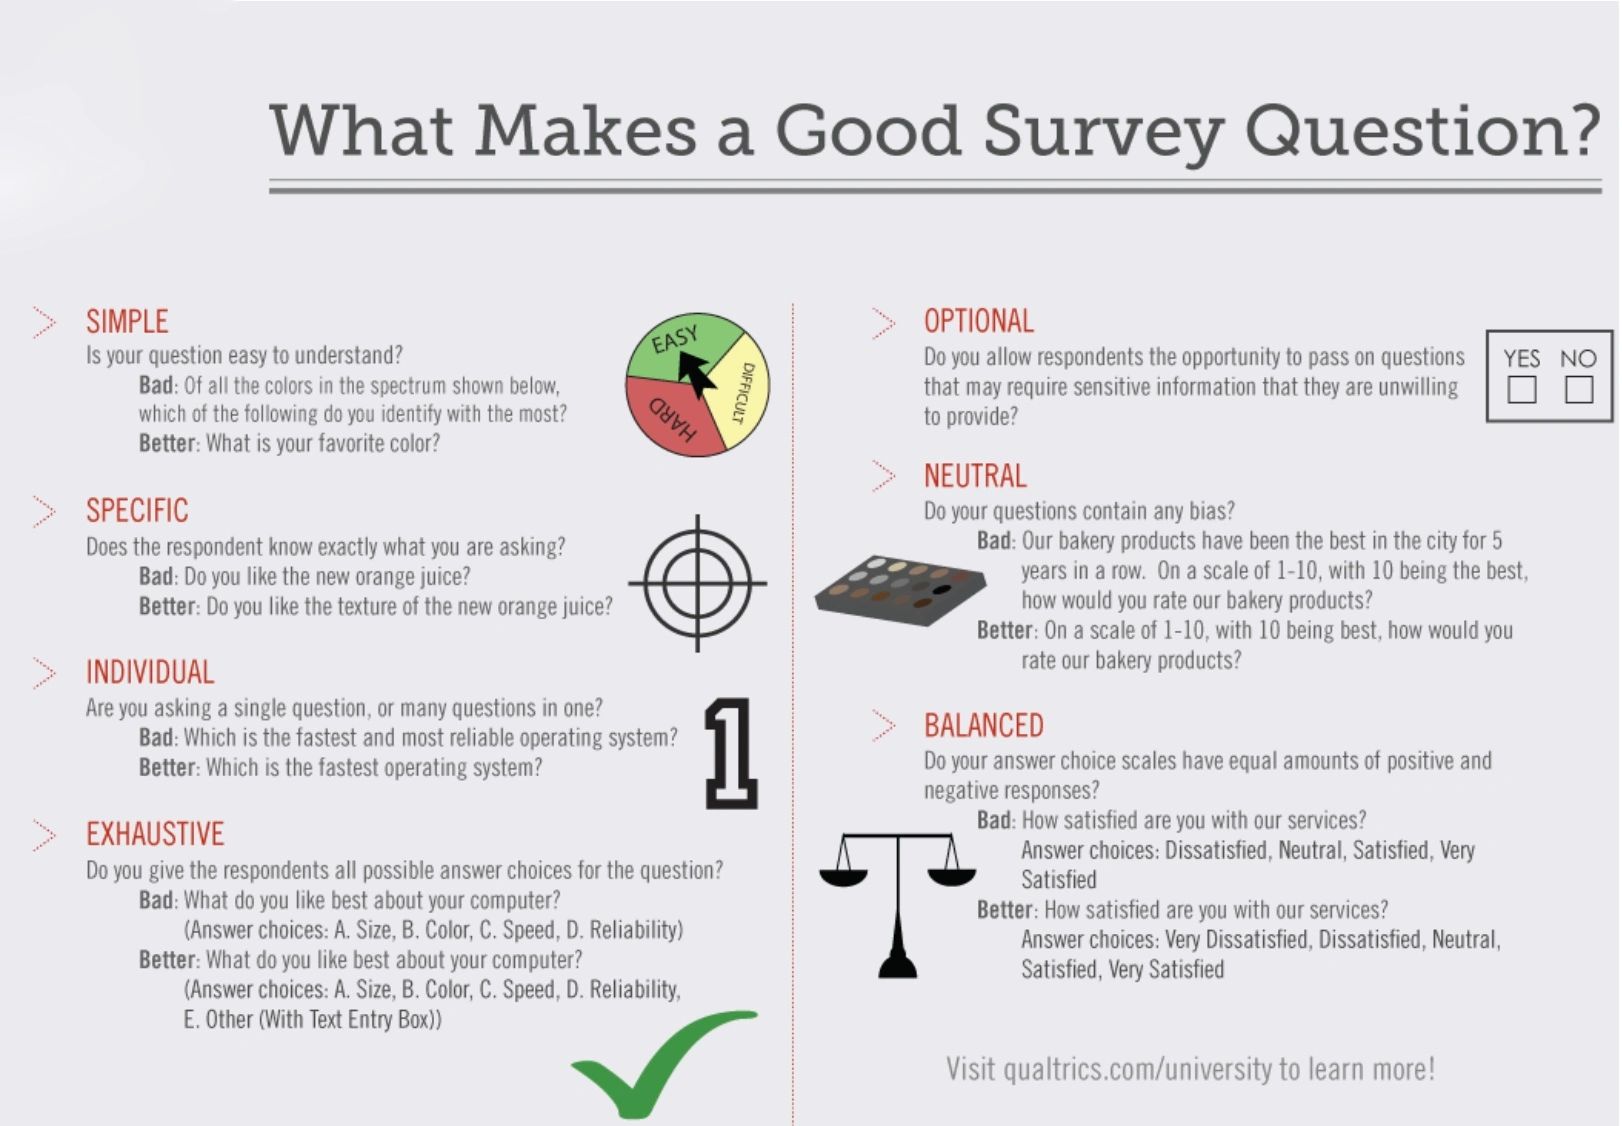 When creating a survey, be sure to create a balanced scale